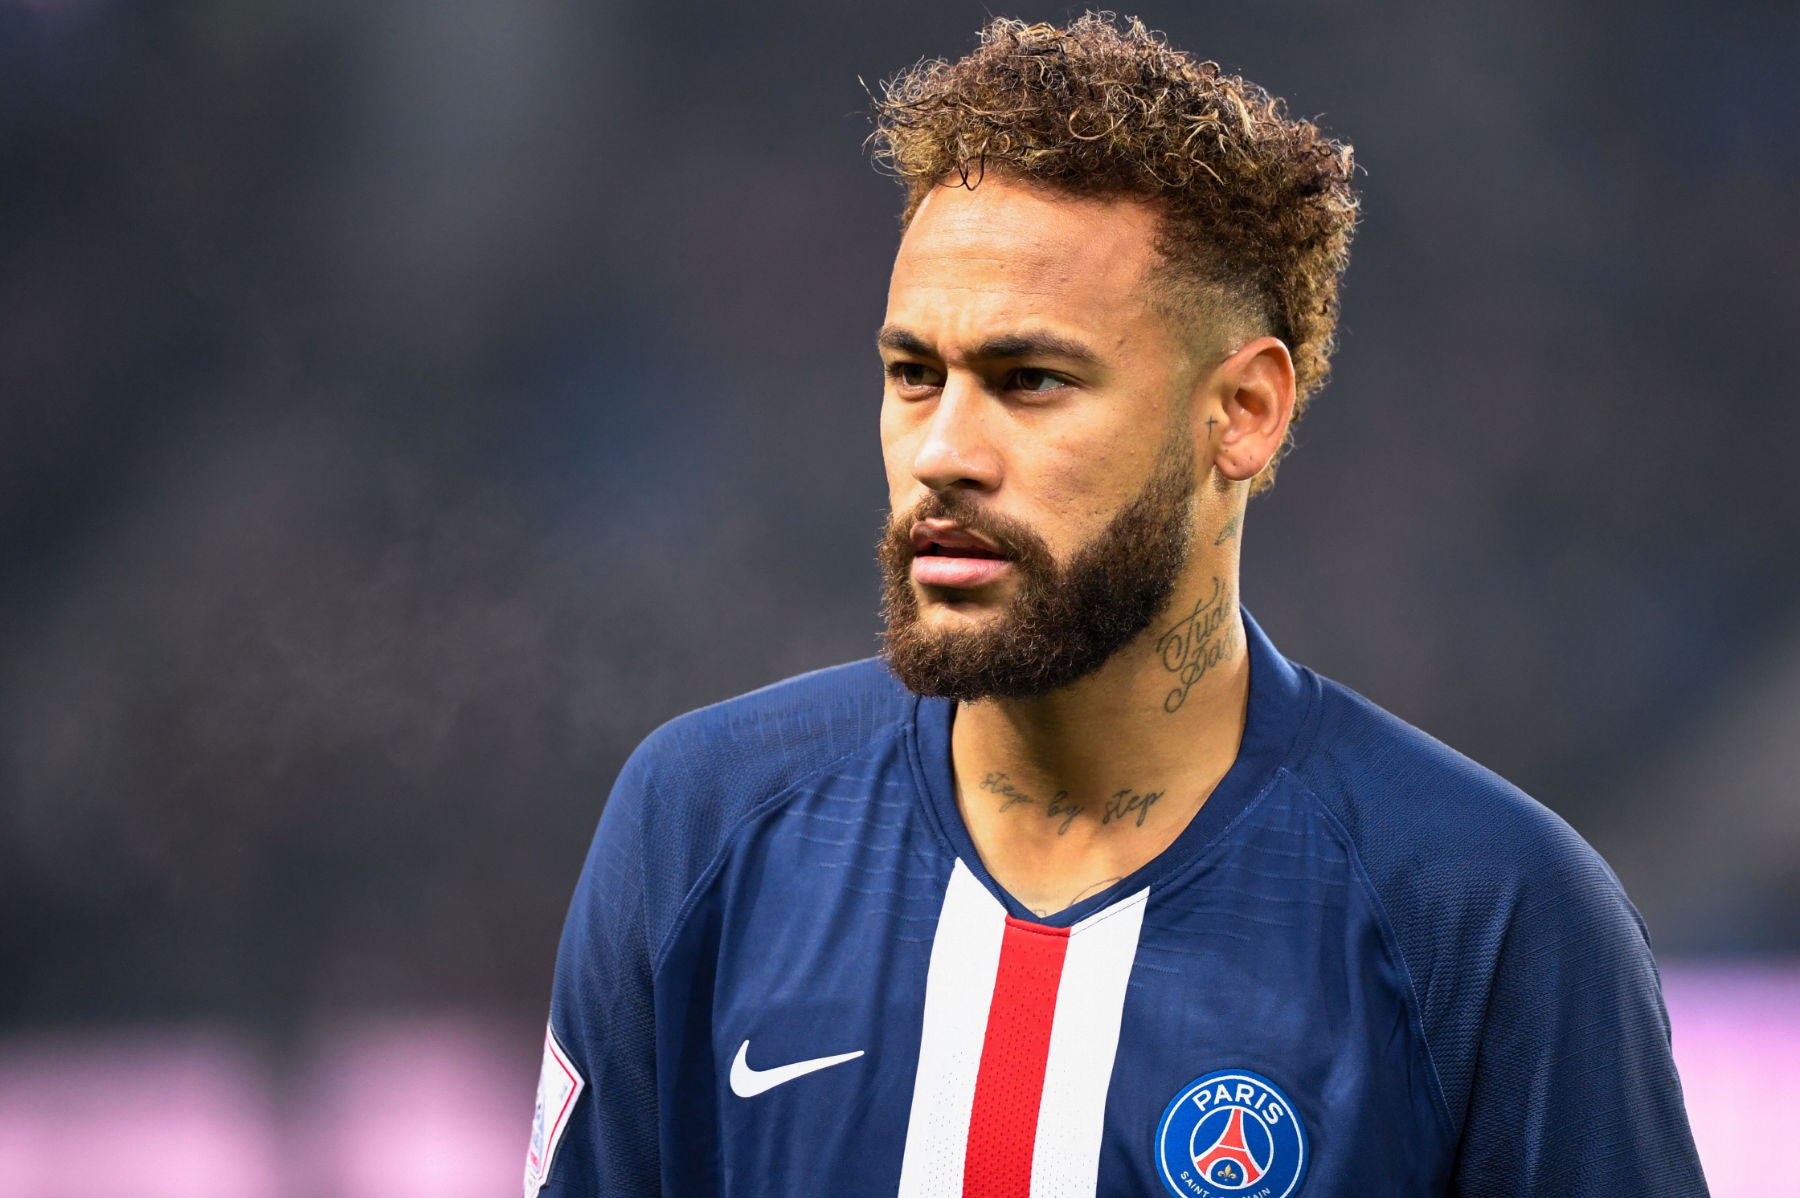 Neymar Booed By PSG Supporters Before Nantes Match - PSG Talk